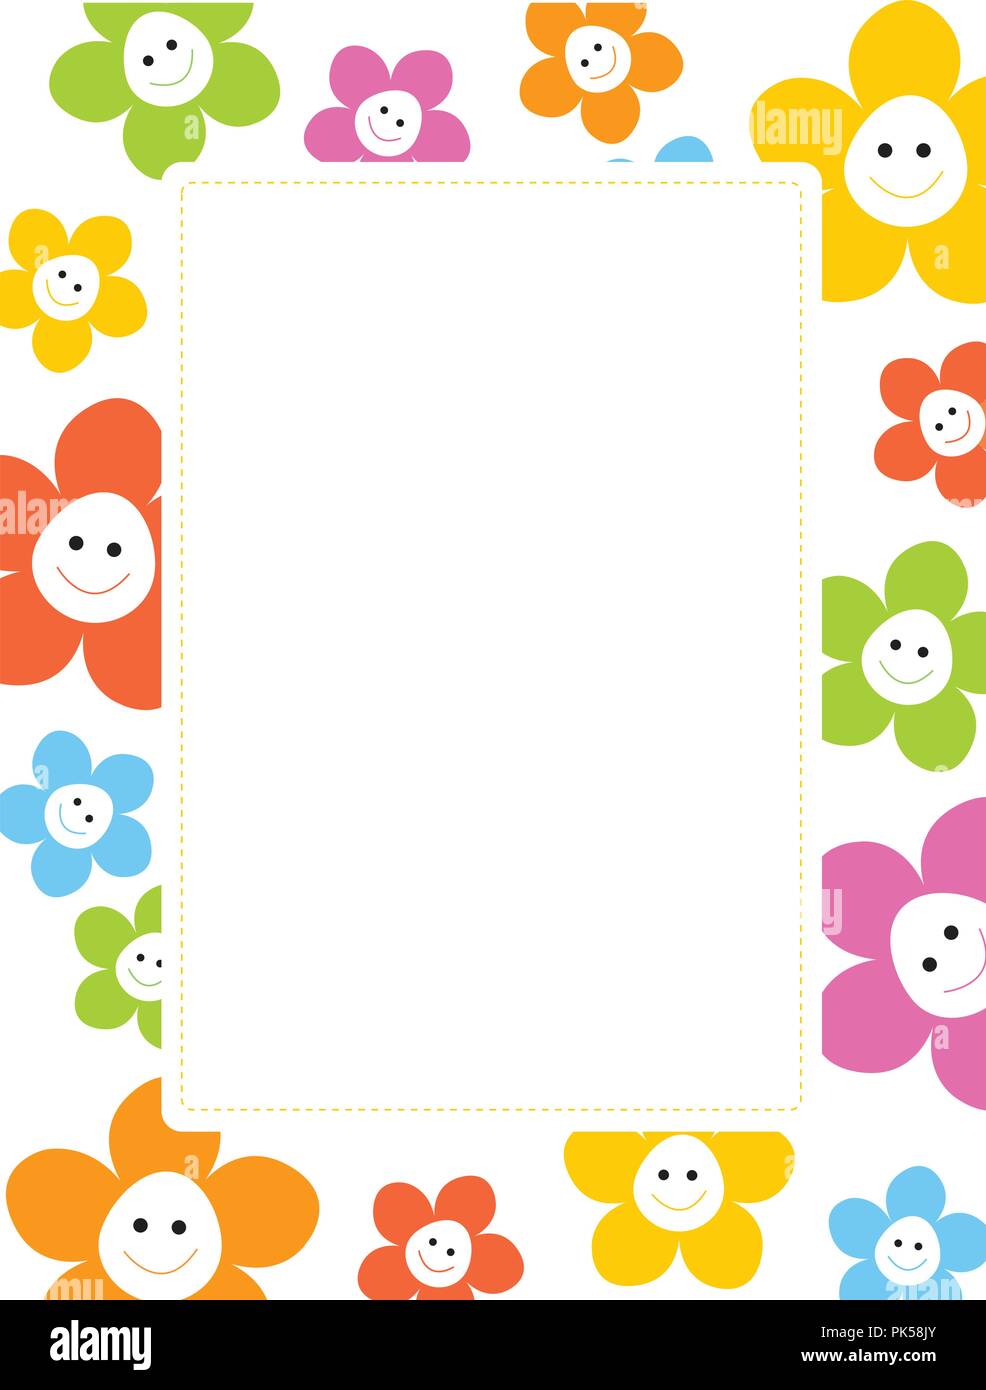 Smiley Face Border Page Borders Clip Art Borders Borders And Frames Images